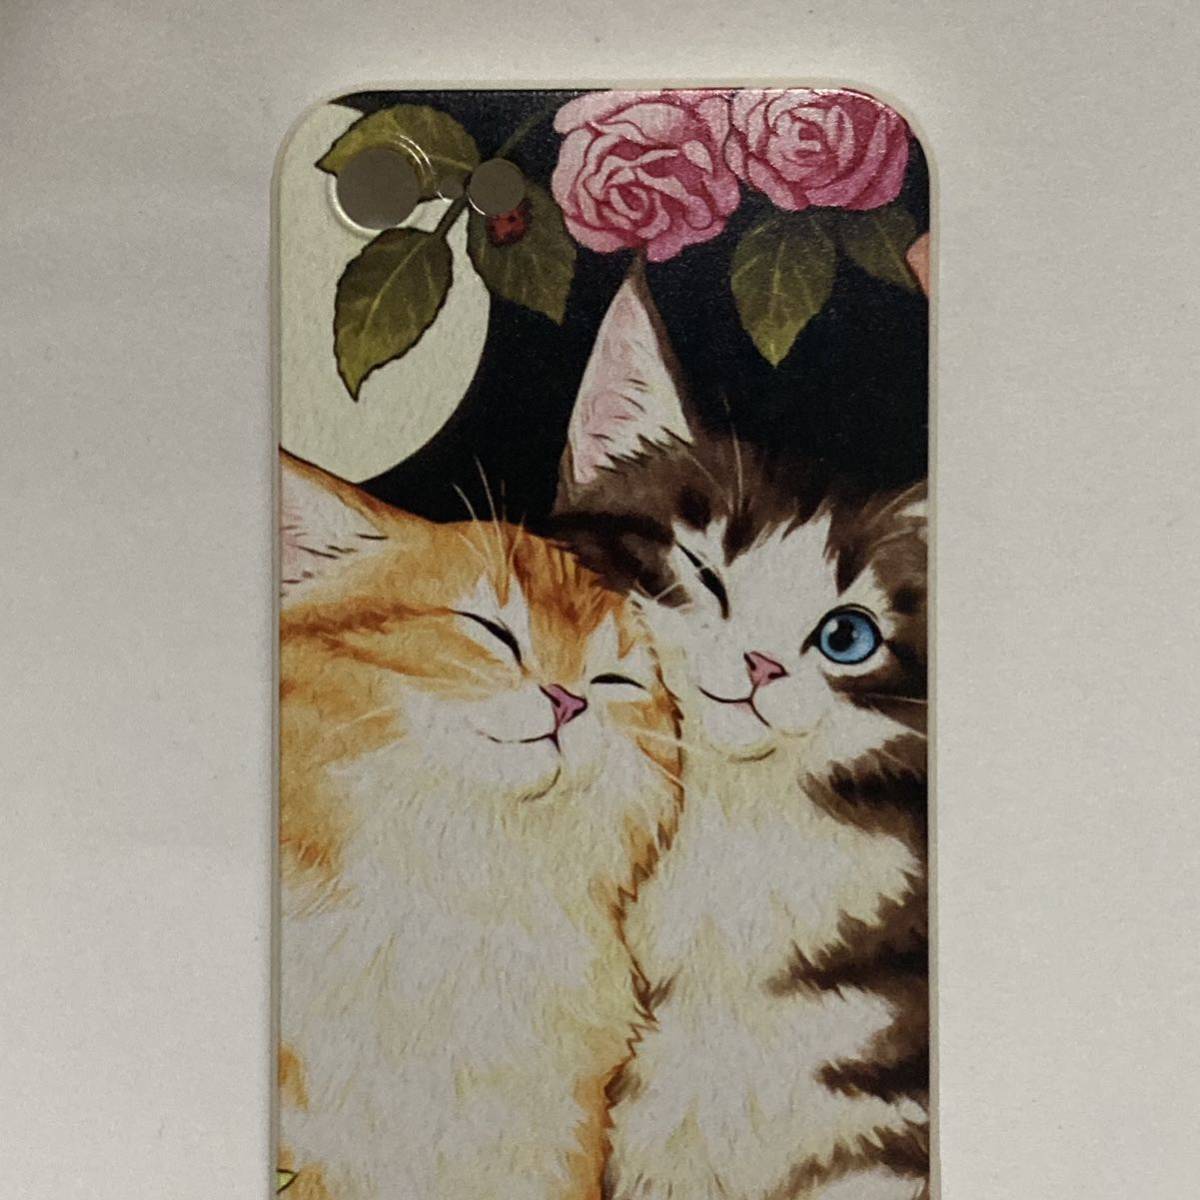  new goods iphone case 7/8/SE2.3 for cat. character stylish illustration beautiful lovely animal Rav Rav picture manner cat cup ru love 